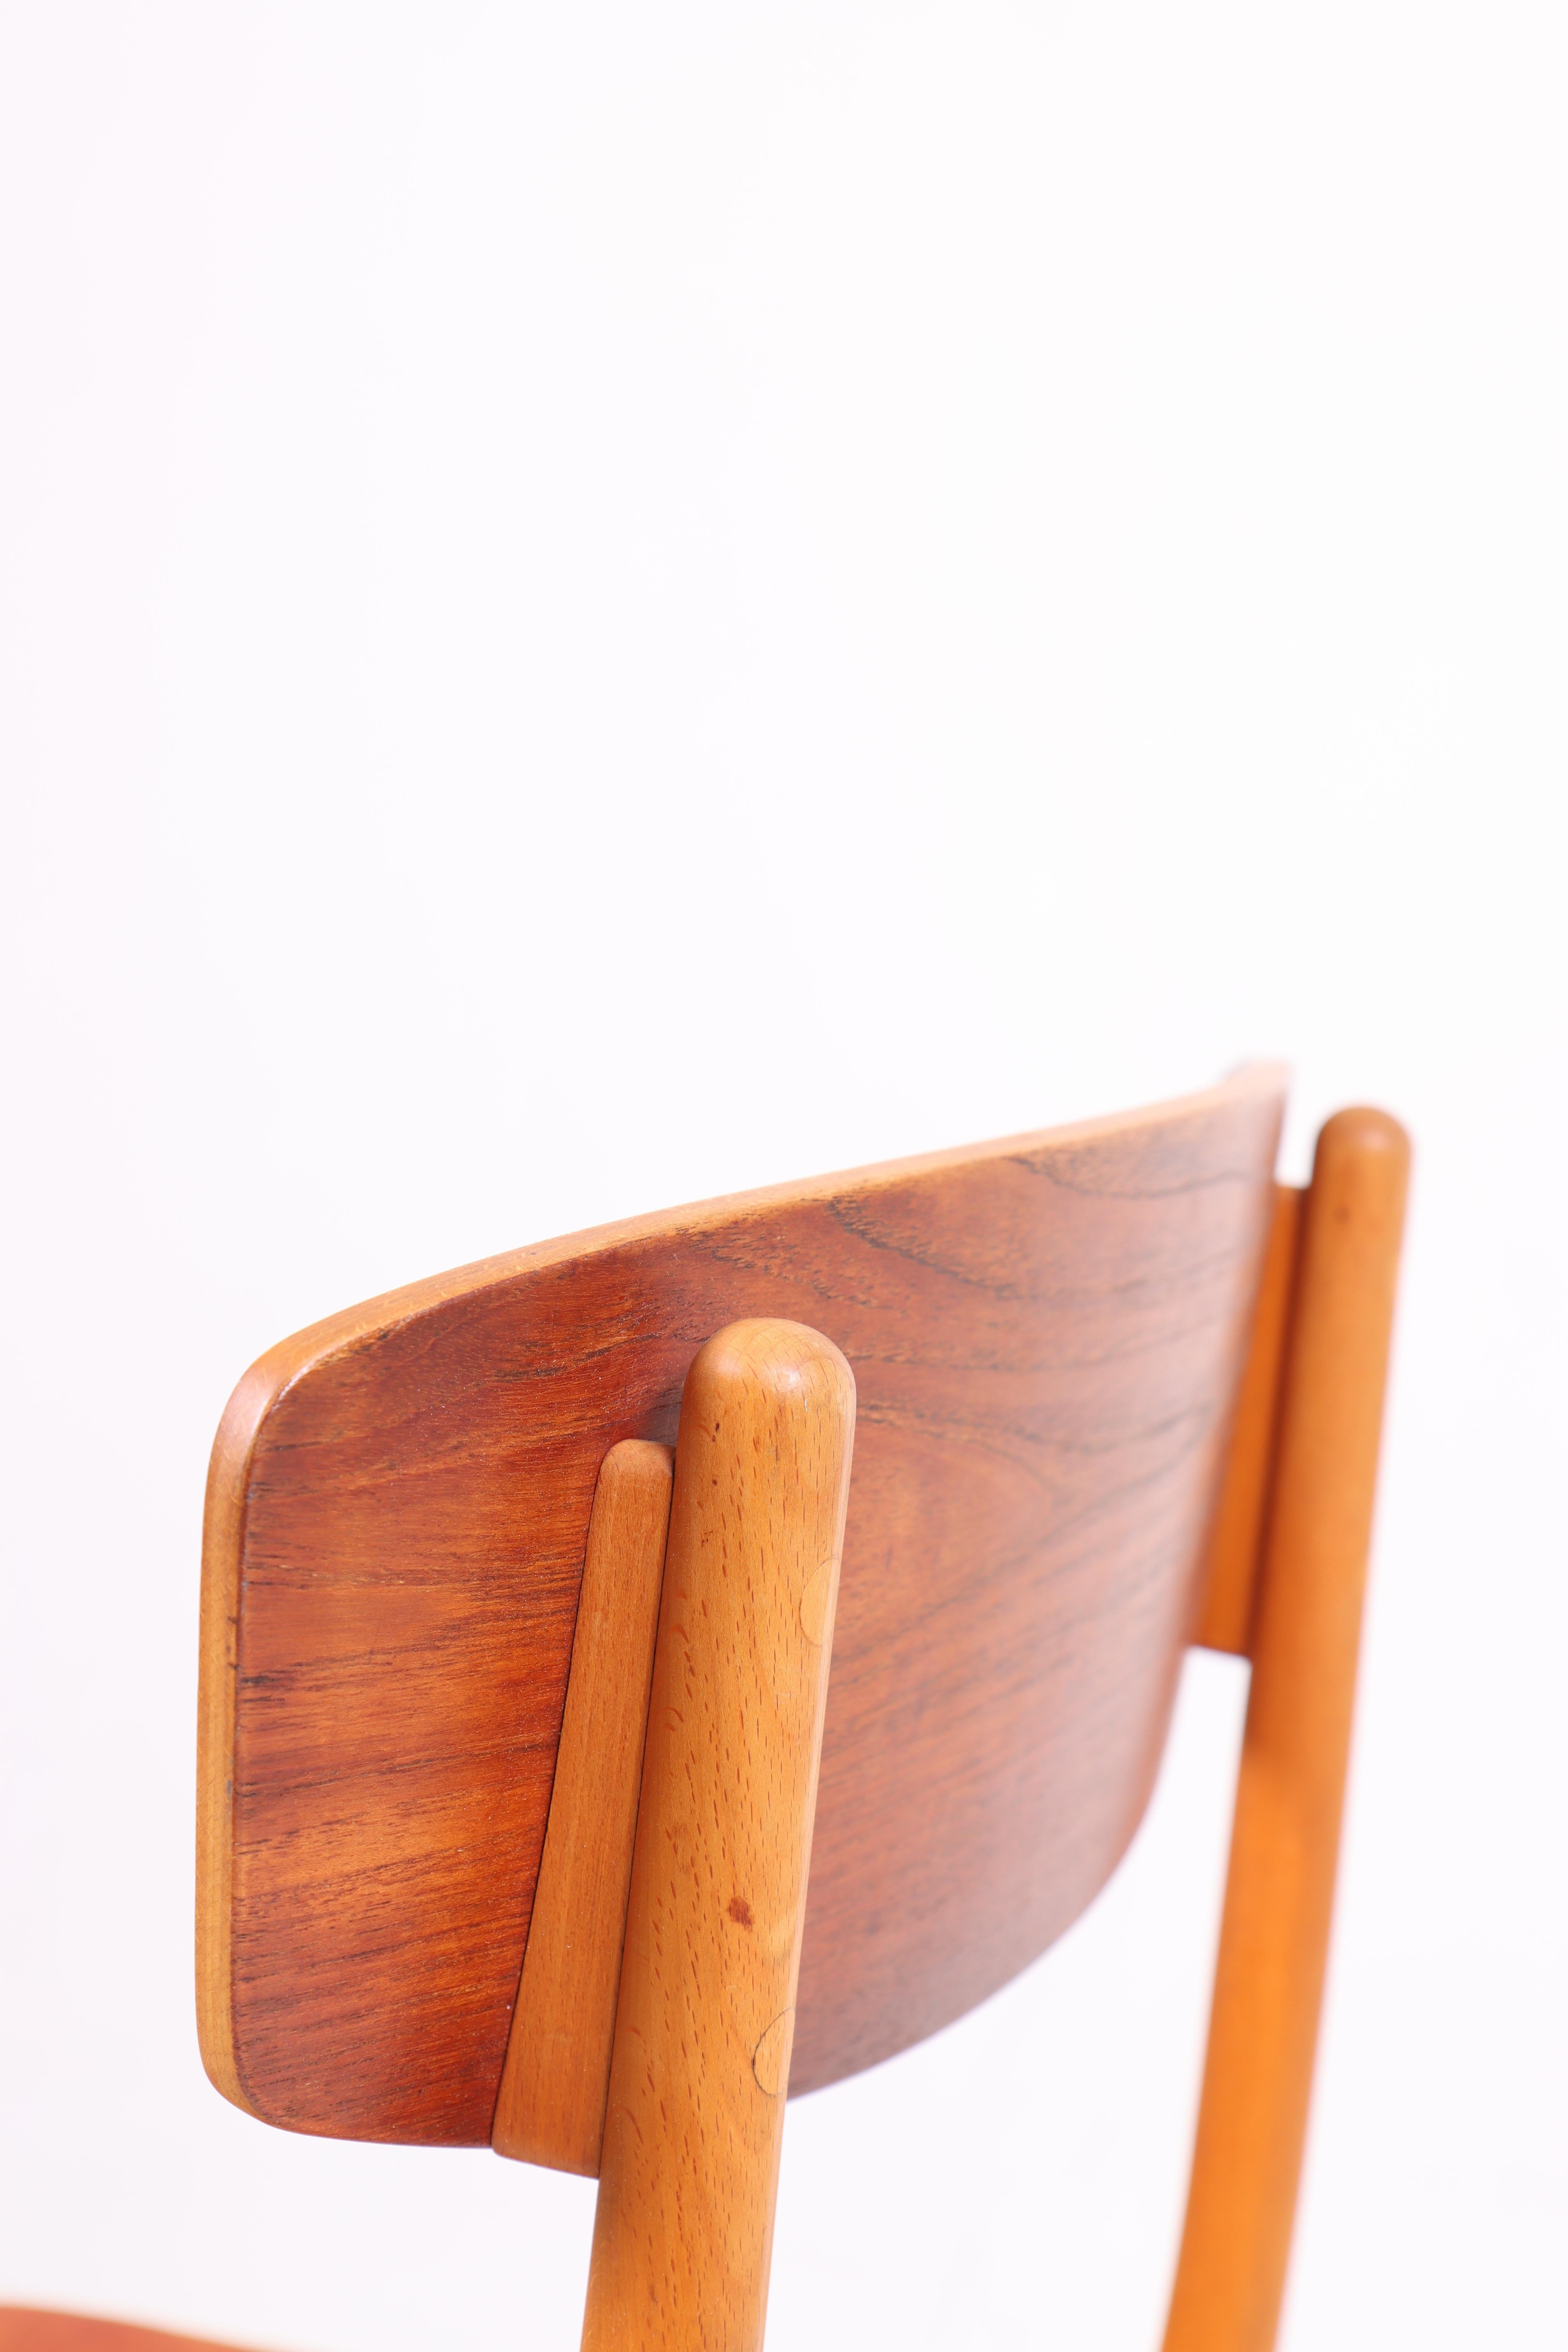 Set of Four Side Chairs in Teak and Leather, Danish Design, 1960s For Sale 4